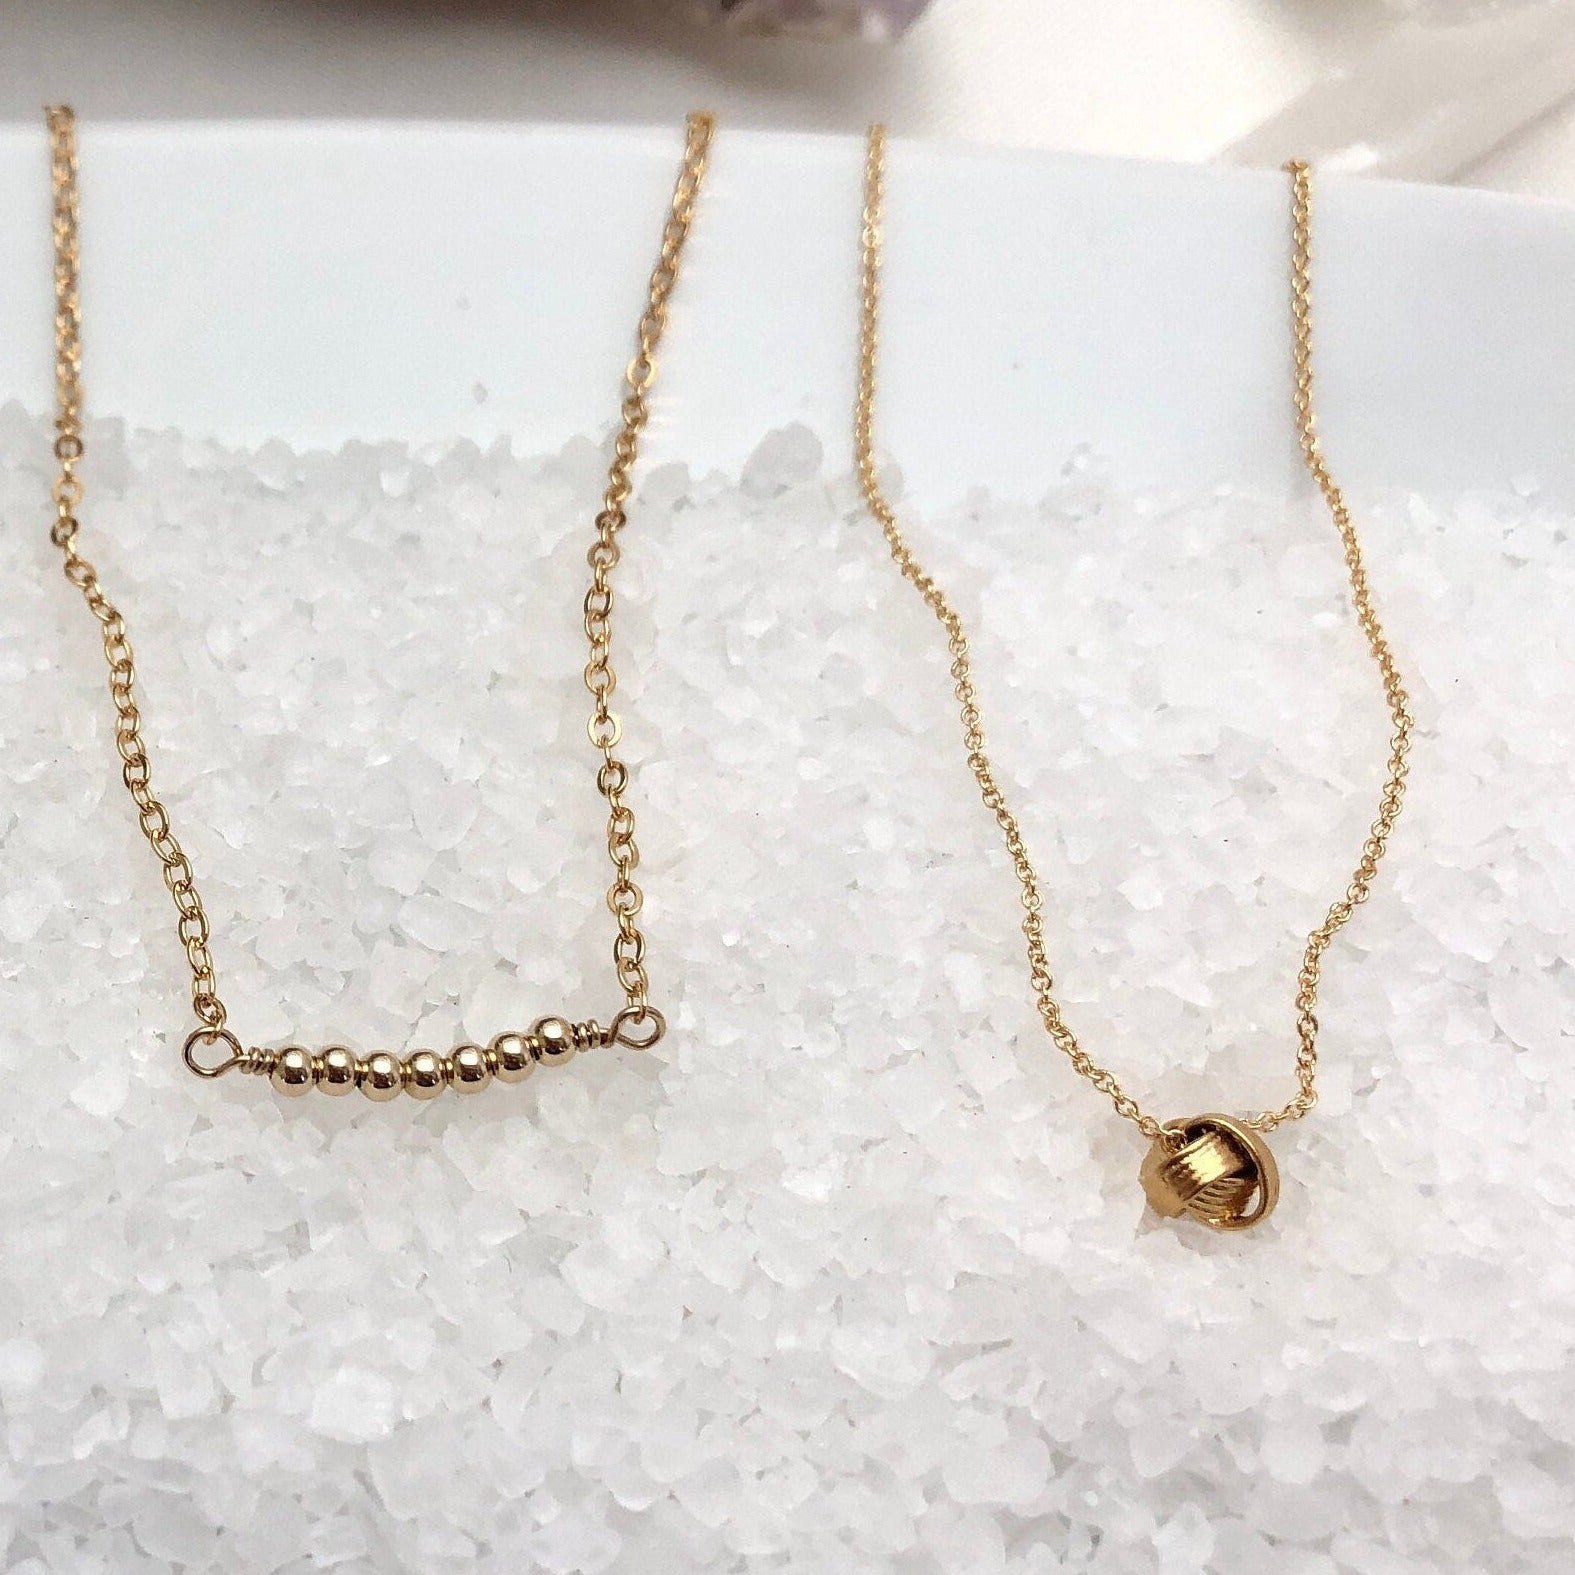 Gold Knot Necklace, Love Knot Necklace